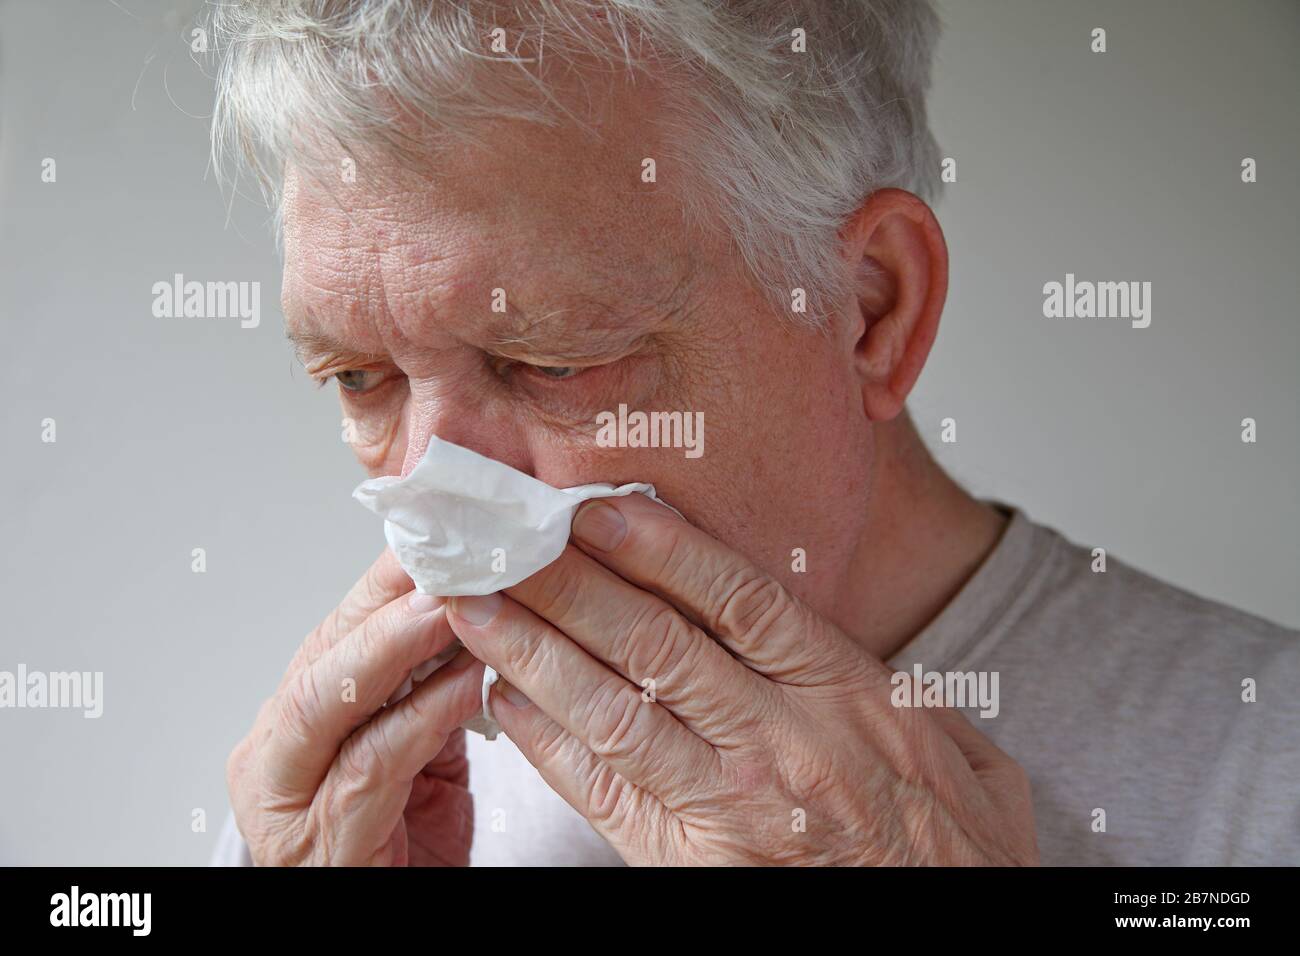 Older man uses a tissue to blow his nose Stock Photo